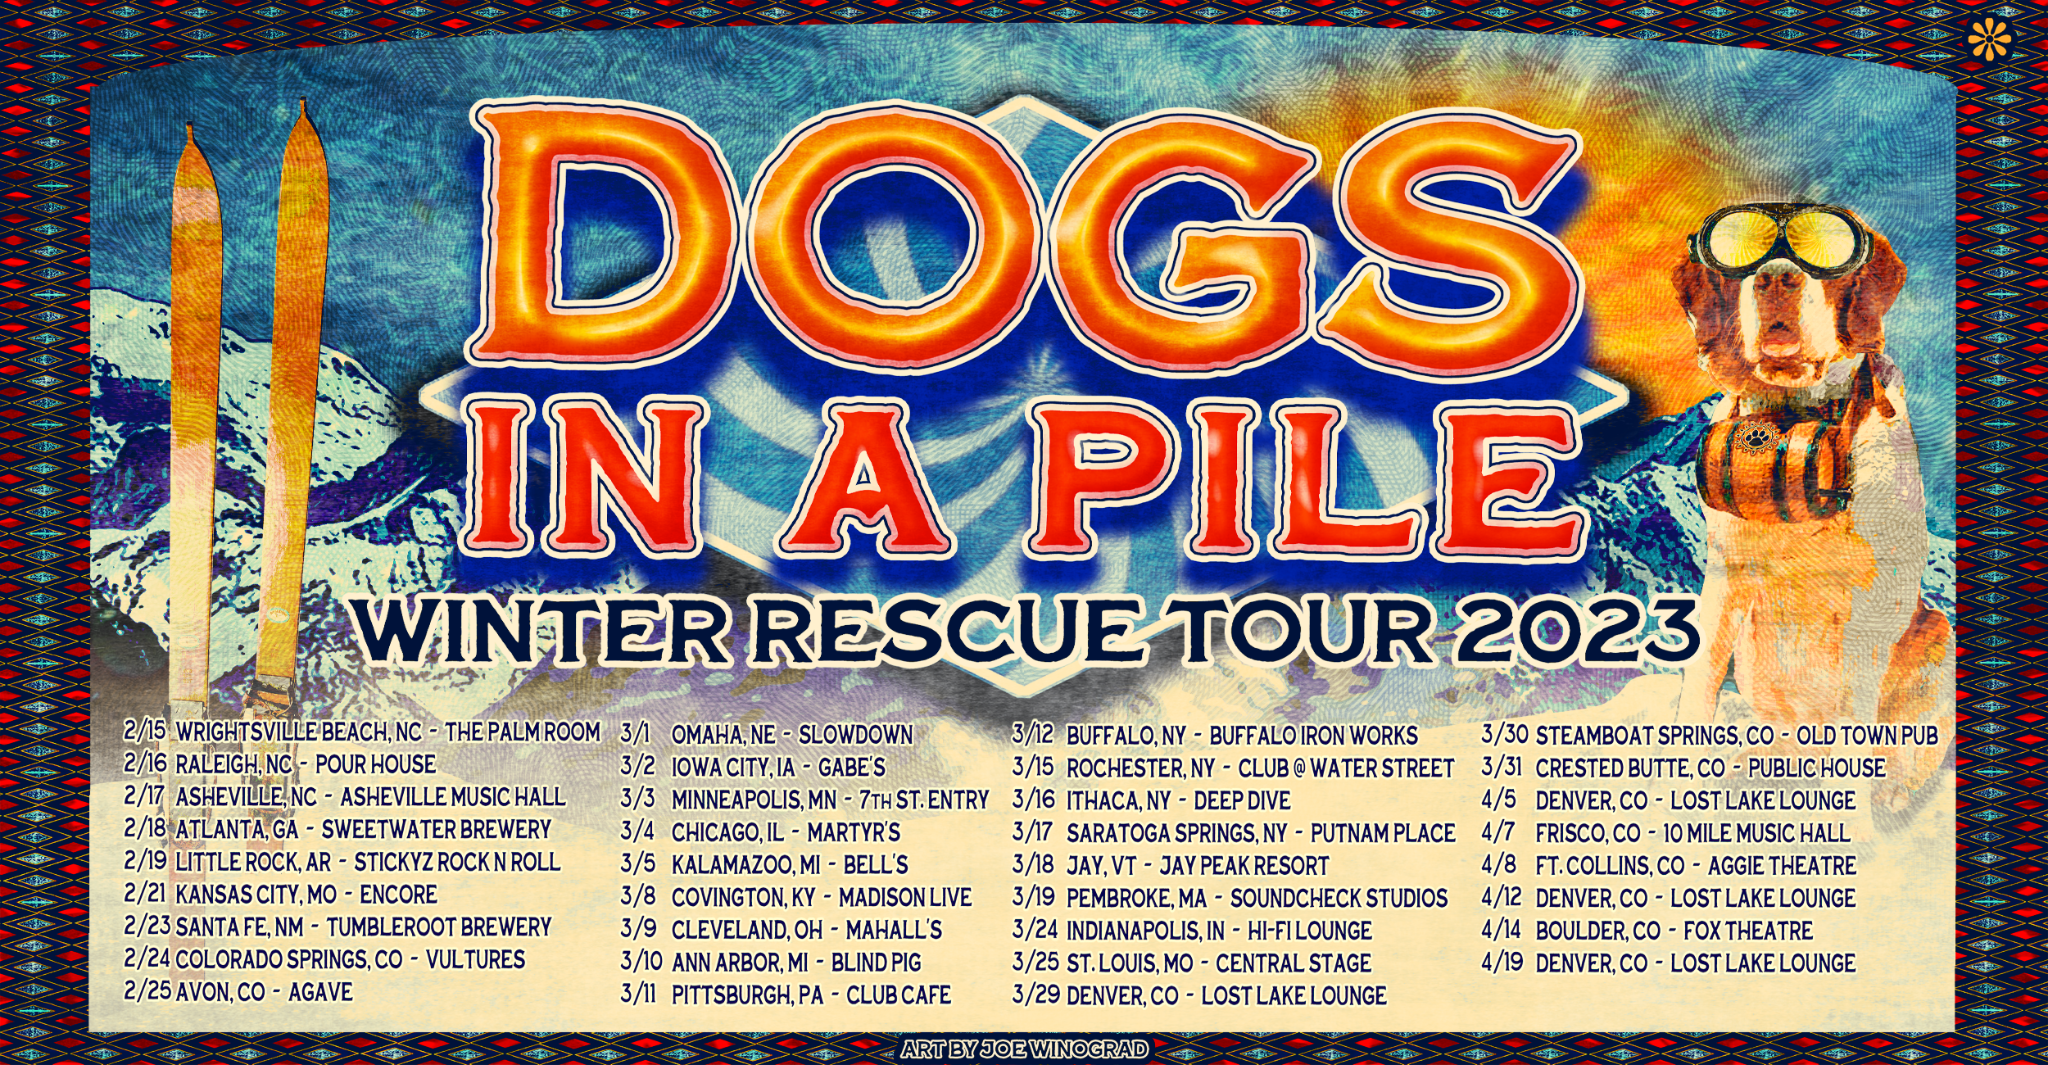 Winter Tour Rescue Tour 2023 Dates for Dogs in a Pile